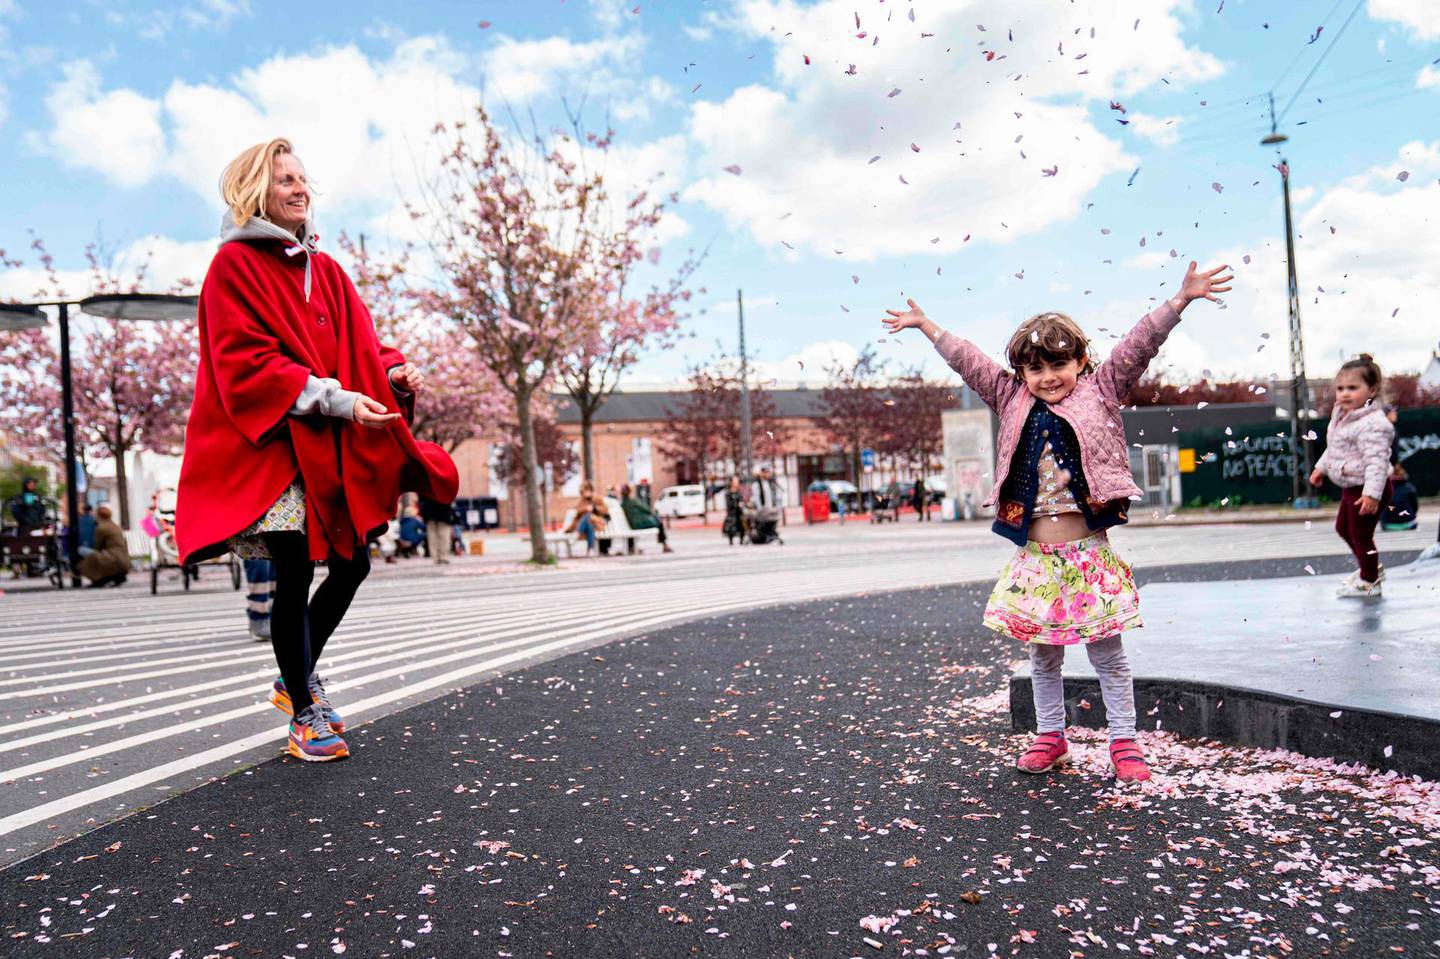 Evi Kjaer Everloeff throws the petals of the Japanese cherry trees in the air with her mother Rikke Kjaer at the Black Square in Copenhagen, on May 3, 2020 as the cherry trees are in full bloom. Denmark OUT
 / AFP / Ritzau Scanpix / Ida Guldbaek Arentsen
